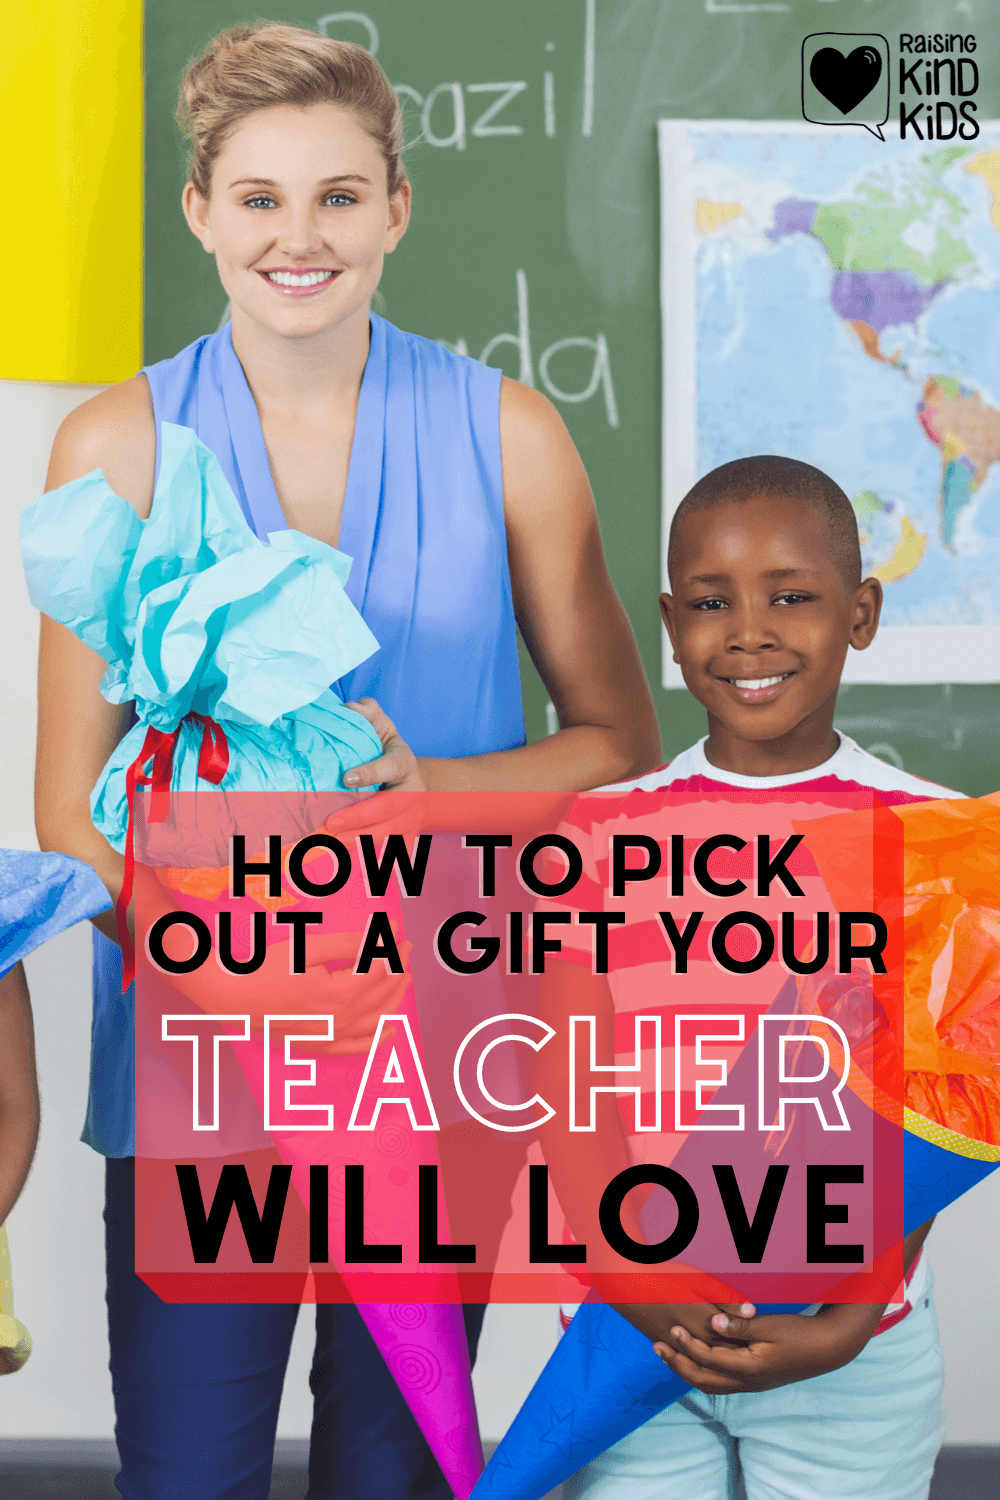 Pick out the perfect teacher gift this holiday with this list of ideas from a teacher. No more mugs or lotions! #GiftIdeas #holidaygifts #teachers